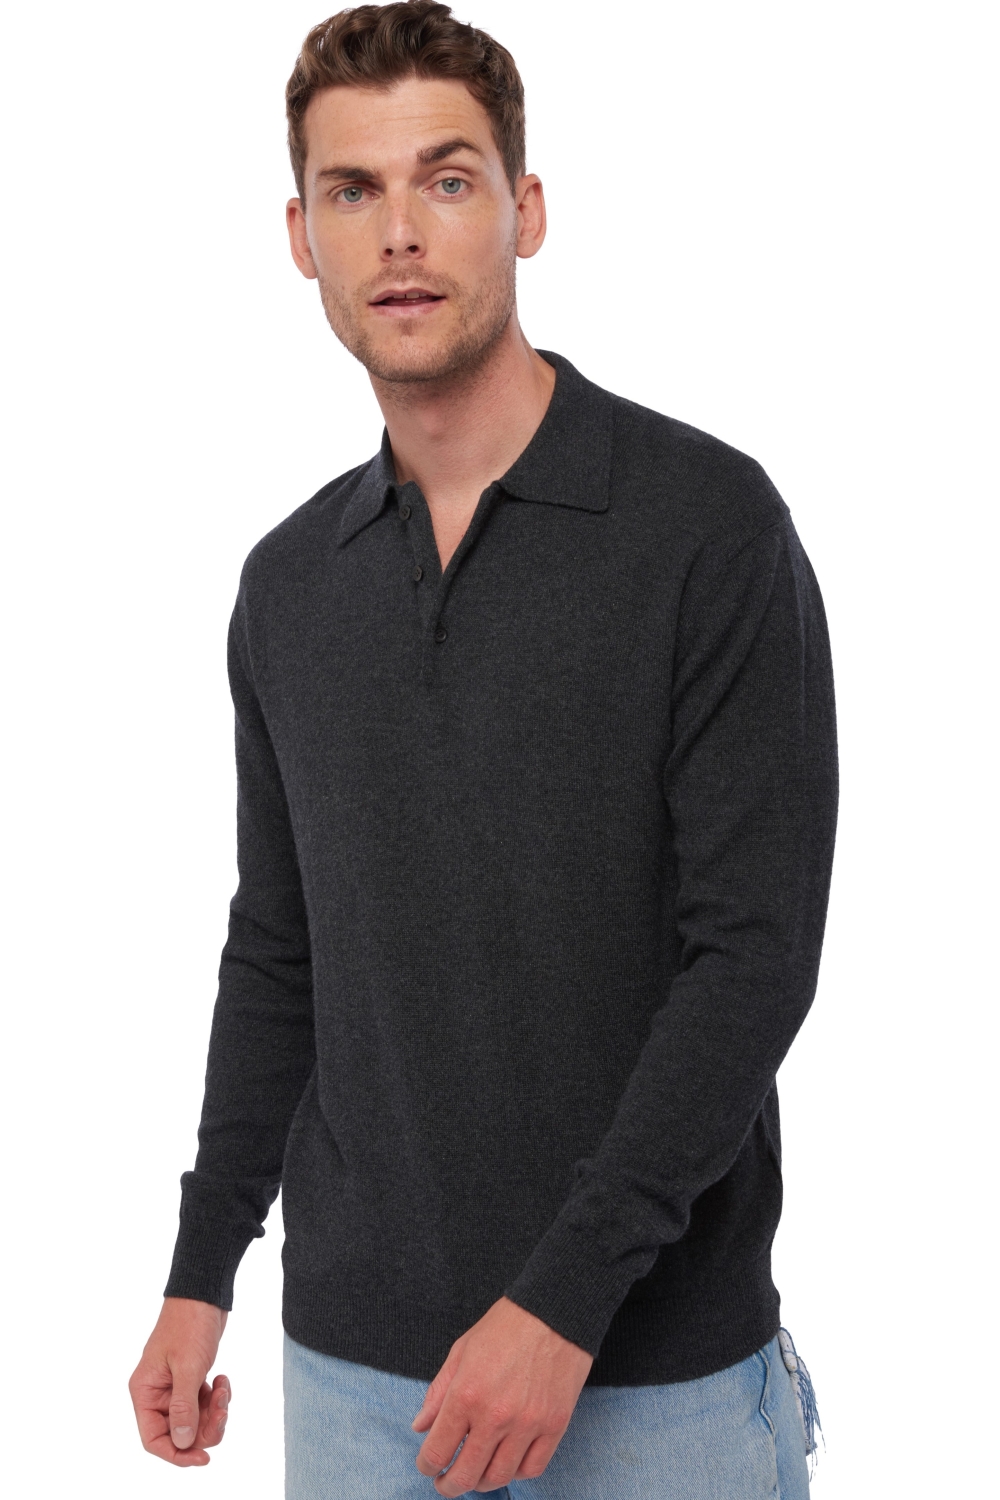 Cachemire polo camionneur homme alexandre anthracite chine s